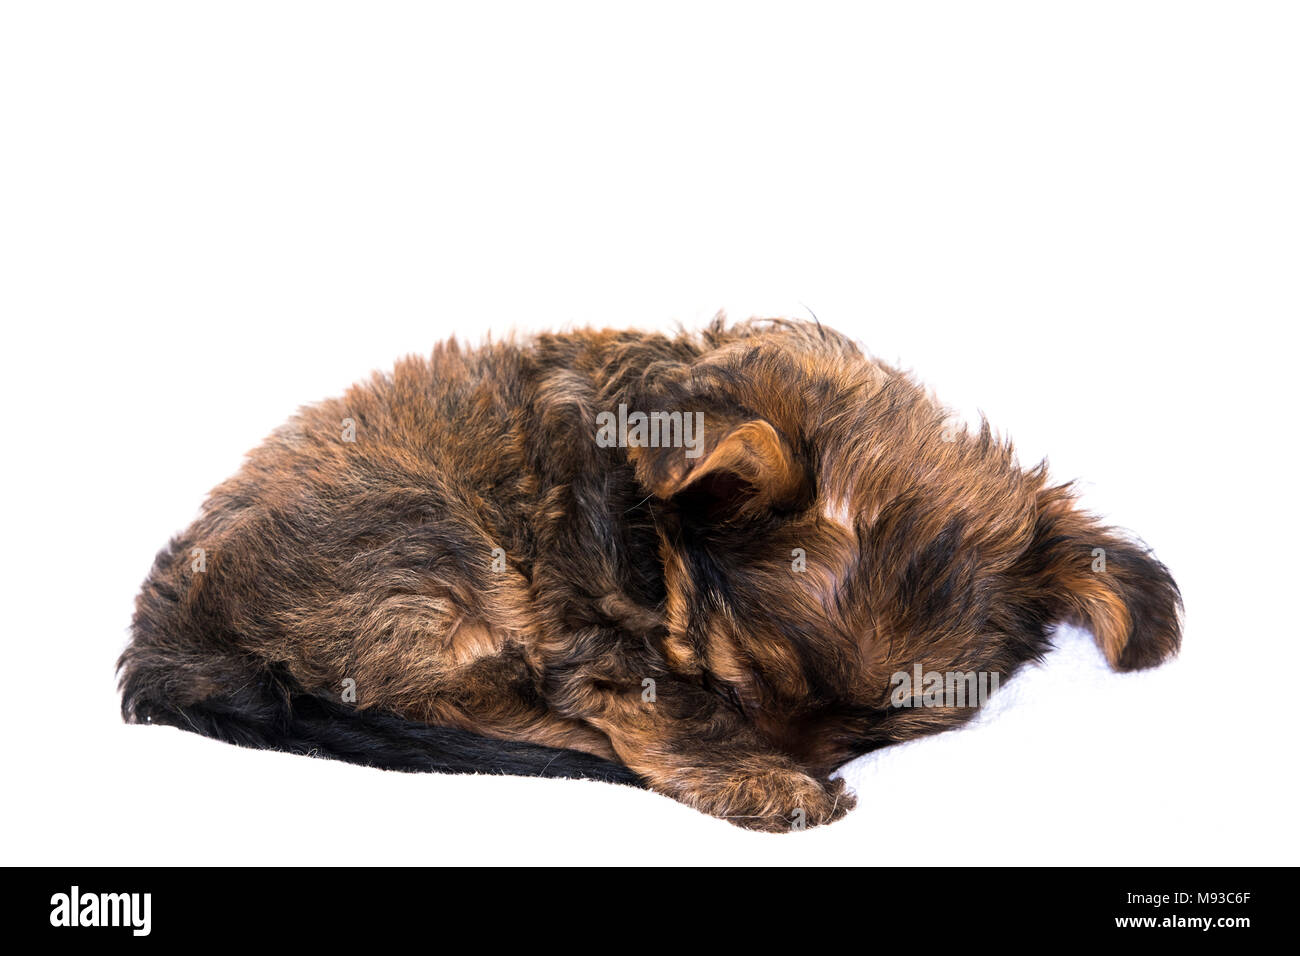 The Yorkshire Terrier is a small dog breed of terrier type, developed during the 19th century in Yorkshire, England, to catch rats in clothing mills. Stock Photo